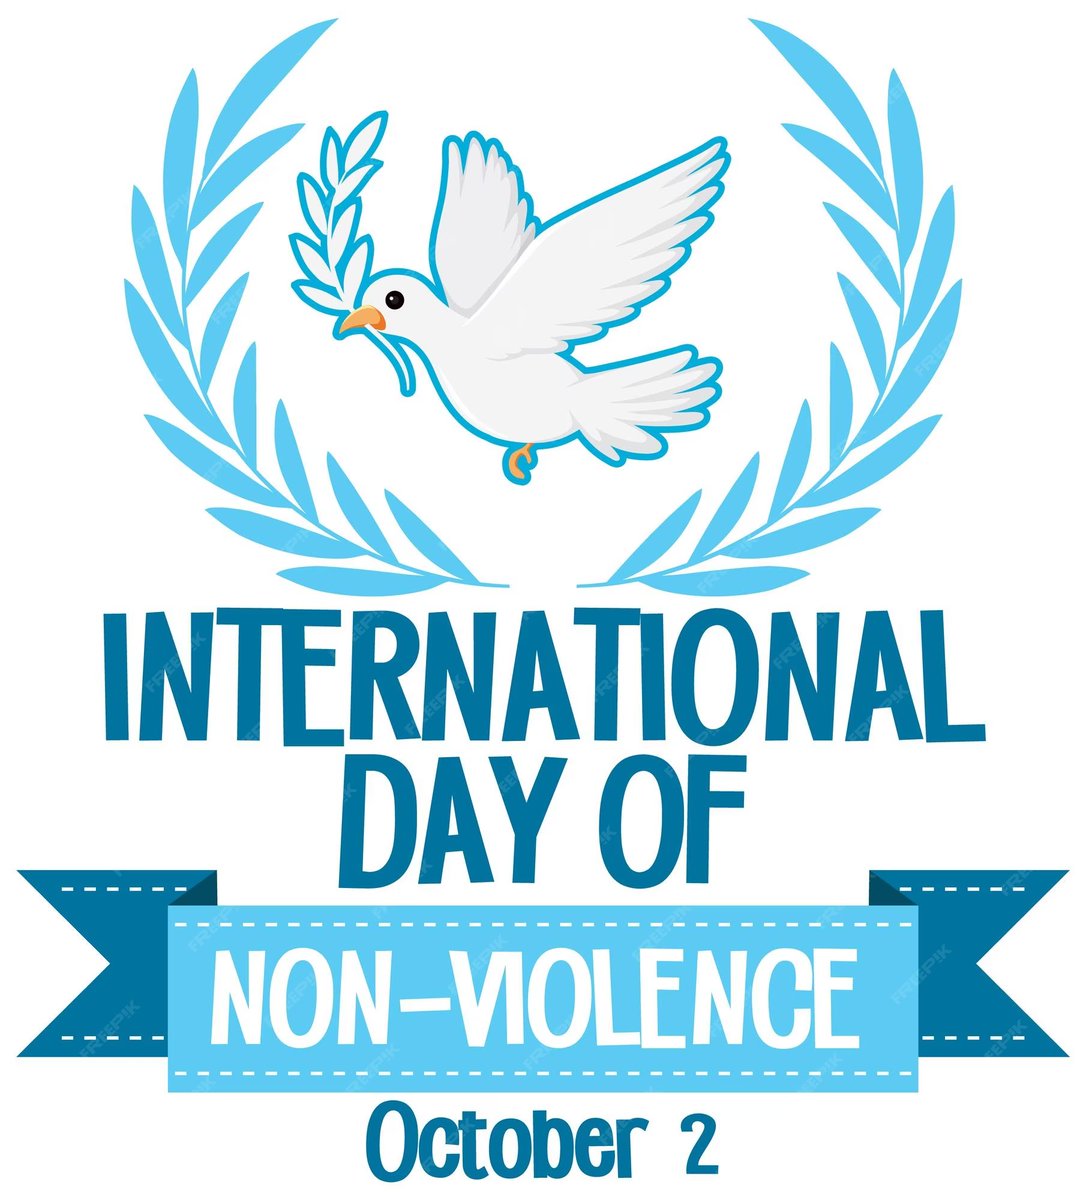 It's #internationaldayofnonviolence. It's normal to be in conflict. Instead of using the conflict as the cause and reason for more separation, we should purpose to understand the reason behind the differences and resolve in non-violent ways because violence cannot bring peace.